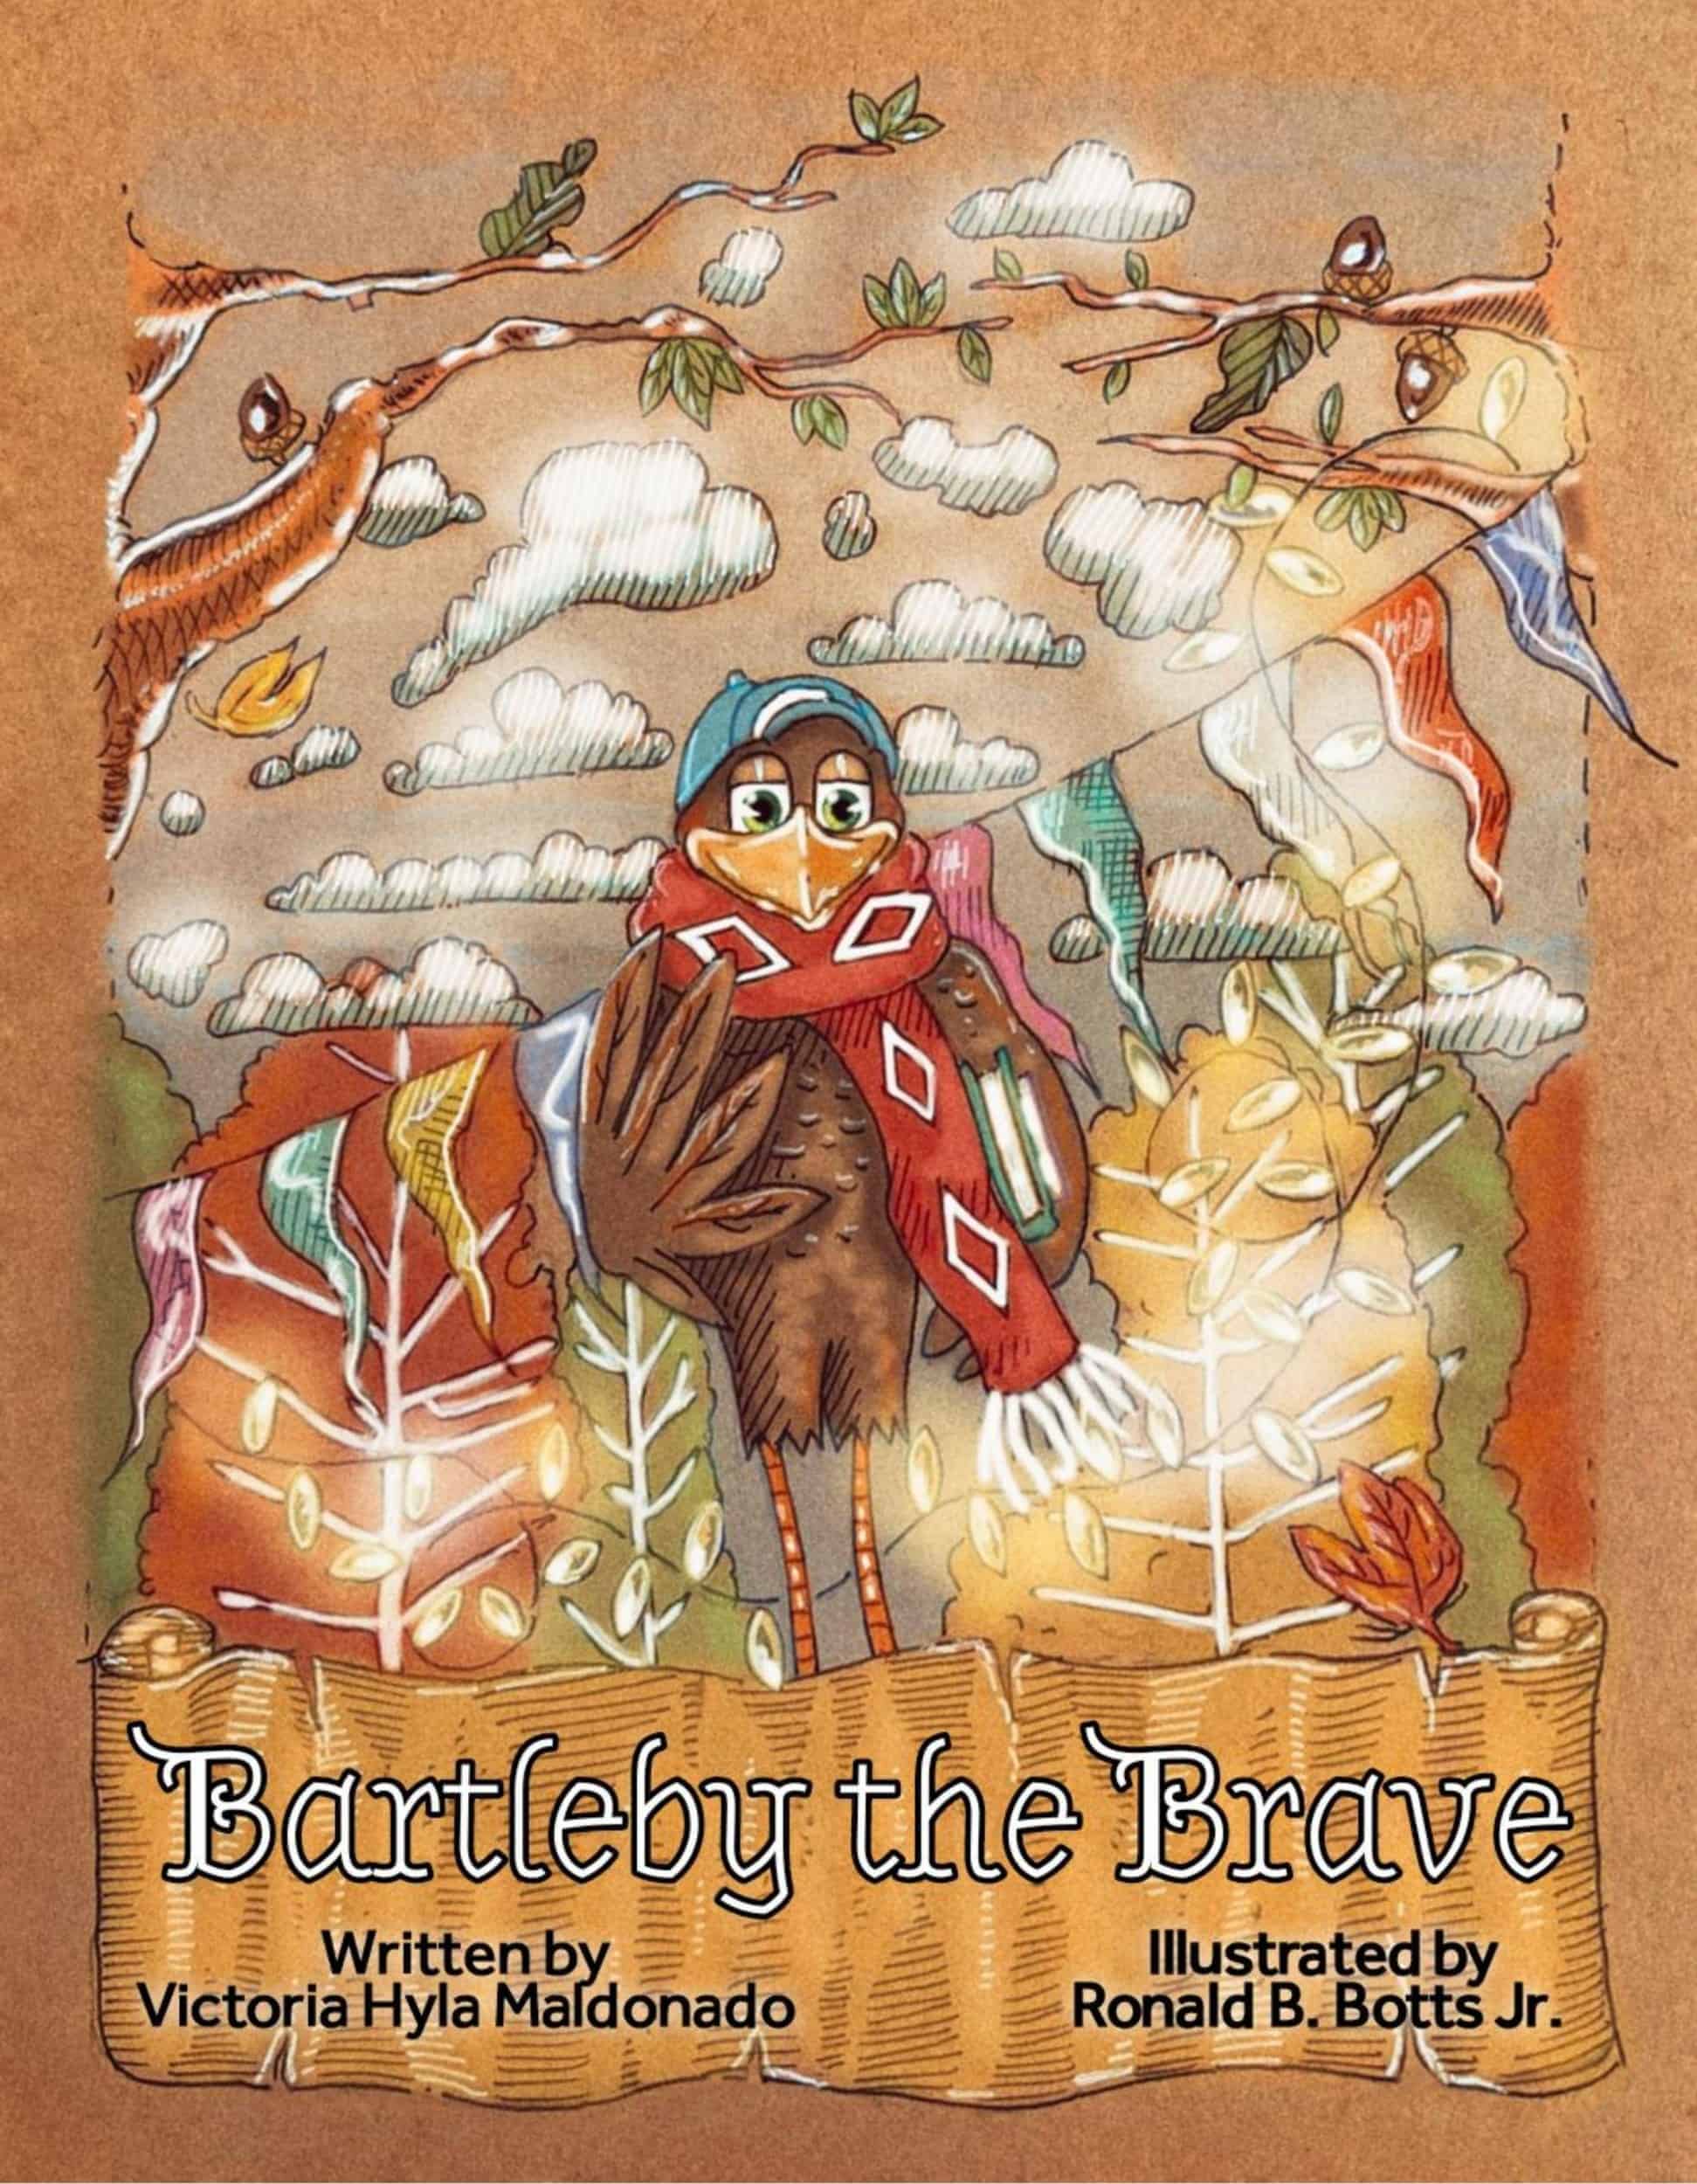 This Bartleby the Brave is made with love by Victoria J. Hyla/Victoria Hyla Maldonado! Shop more unique gift ideas today with Spots Initiatives, the best way to support creators.